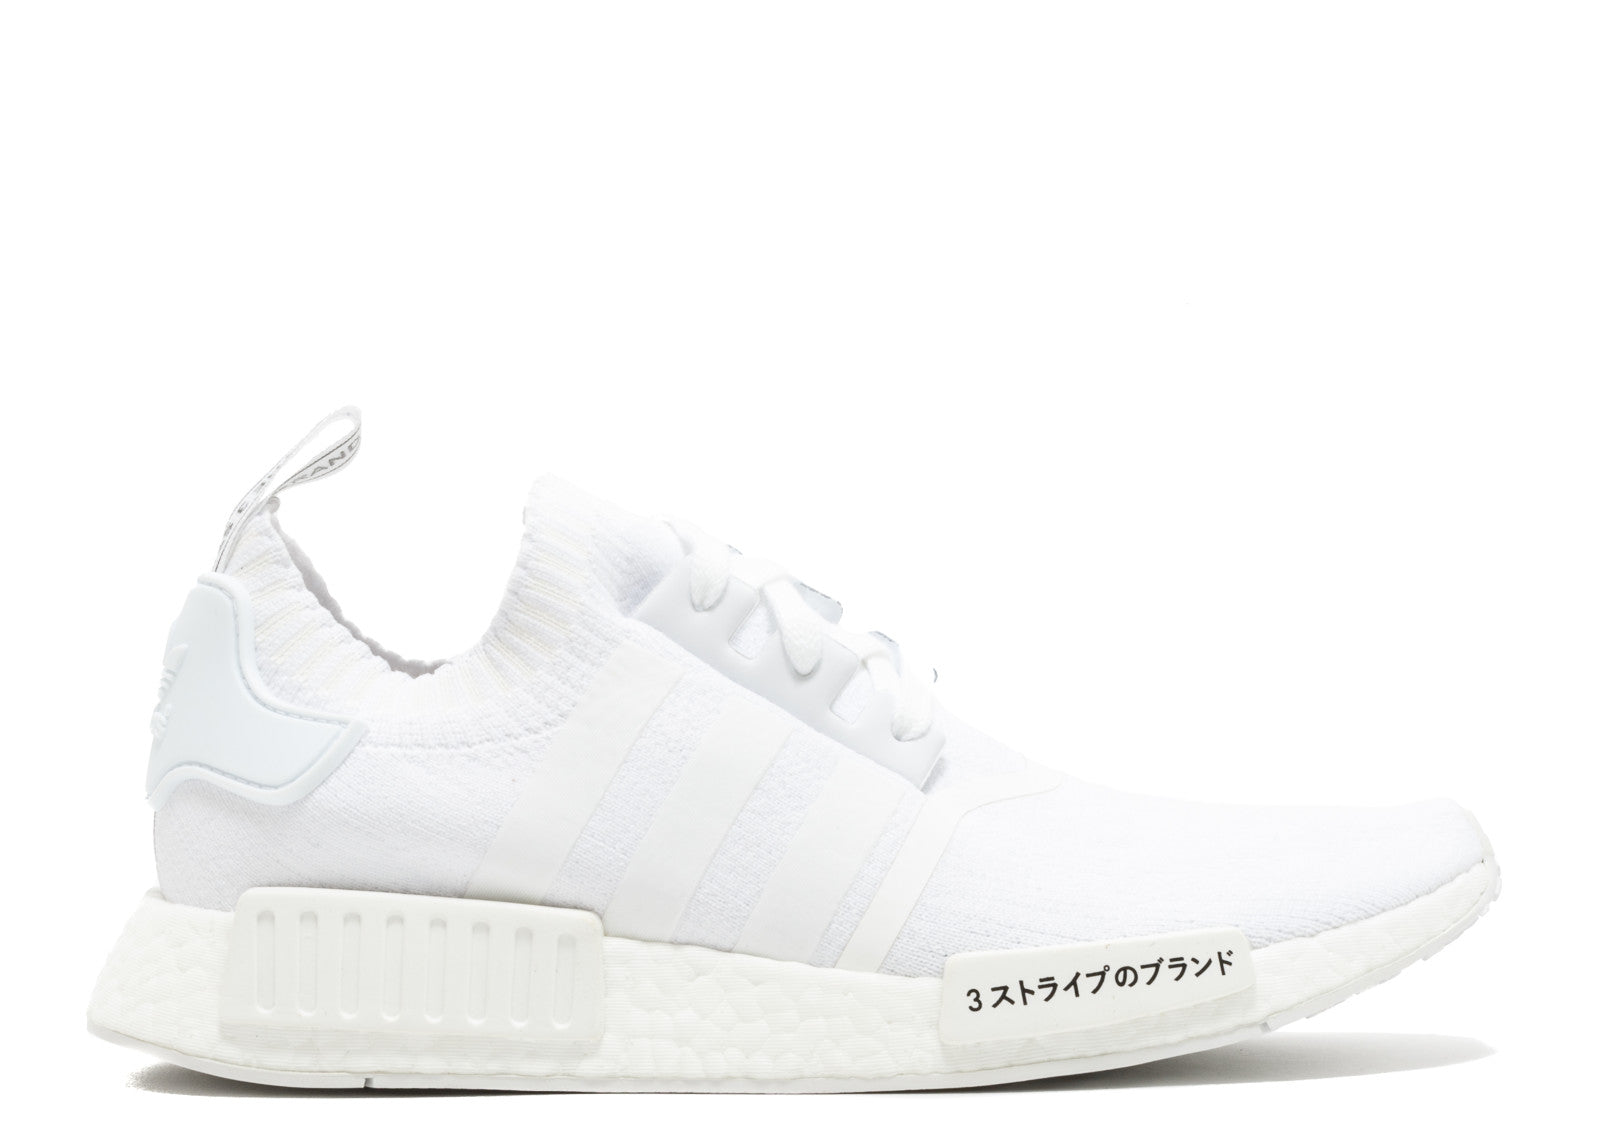 adidas nmd boost white The Adidas 